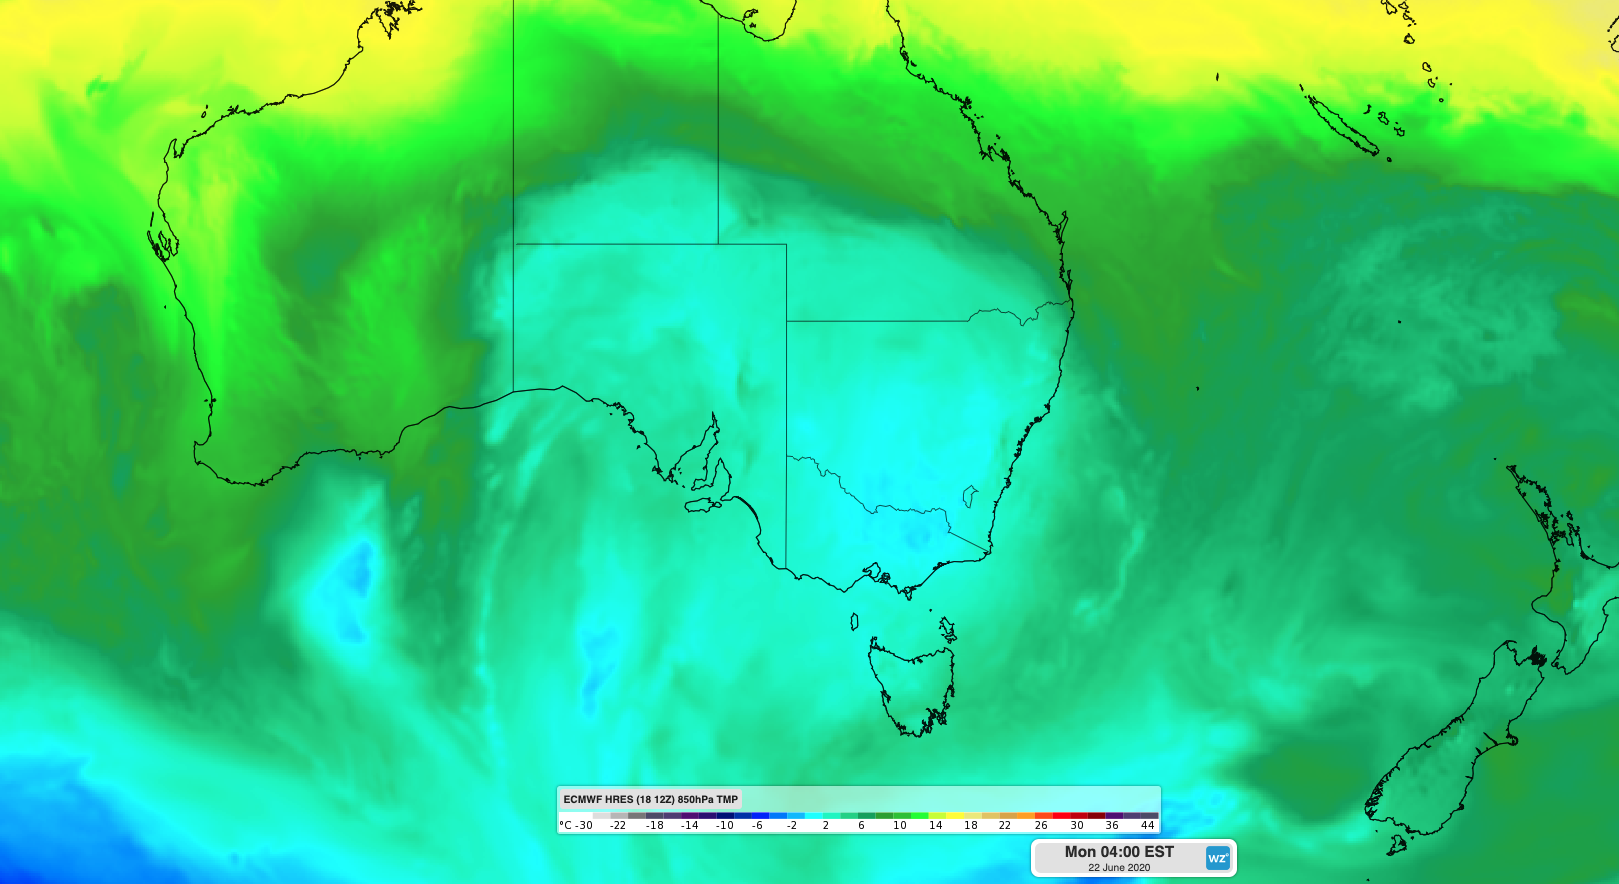 Cold weather inbound for southern, eastern Australia